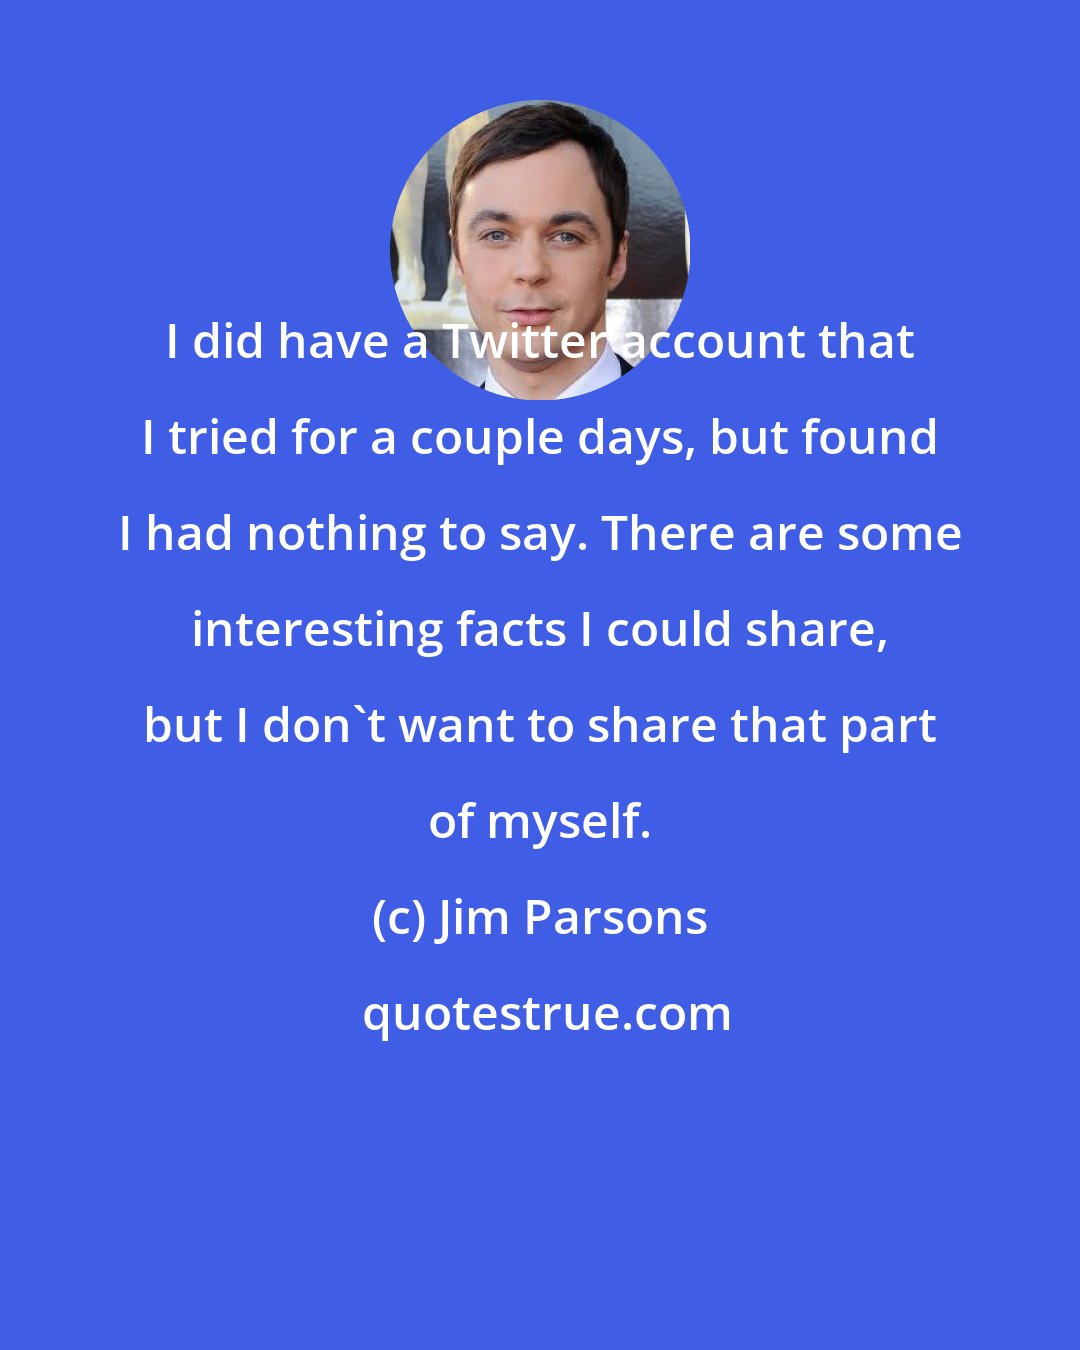 Jim Parsons: I did have a Twitter account that I tried for a couple days, but found I had nothing to say. There are some interesting facts I could share, but I don't want to share that part of myself.